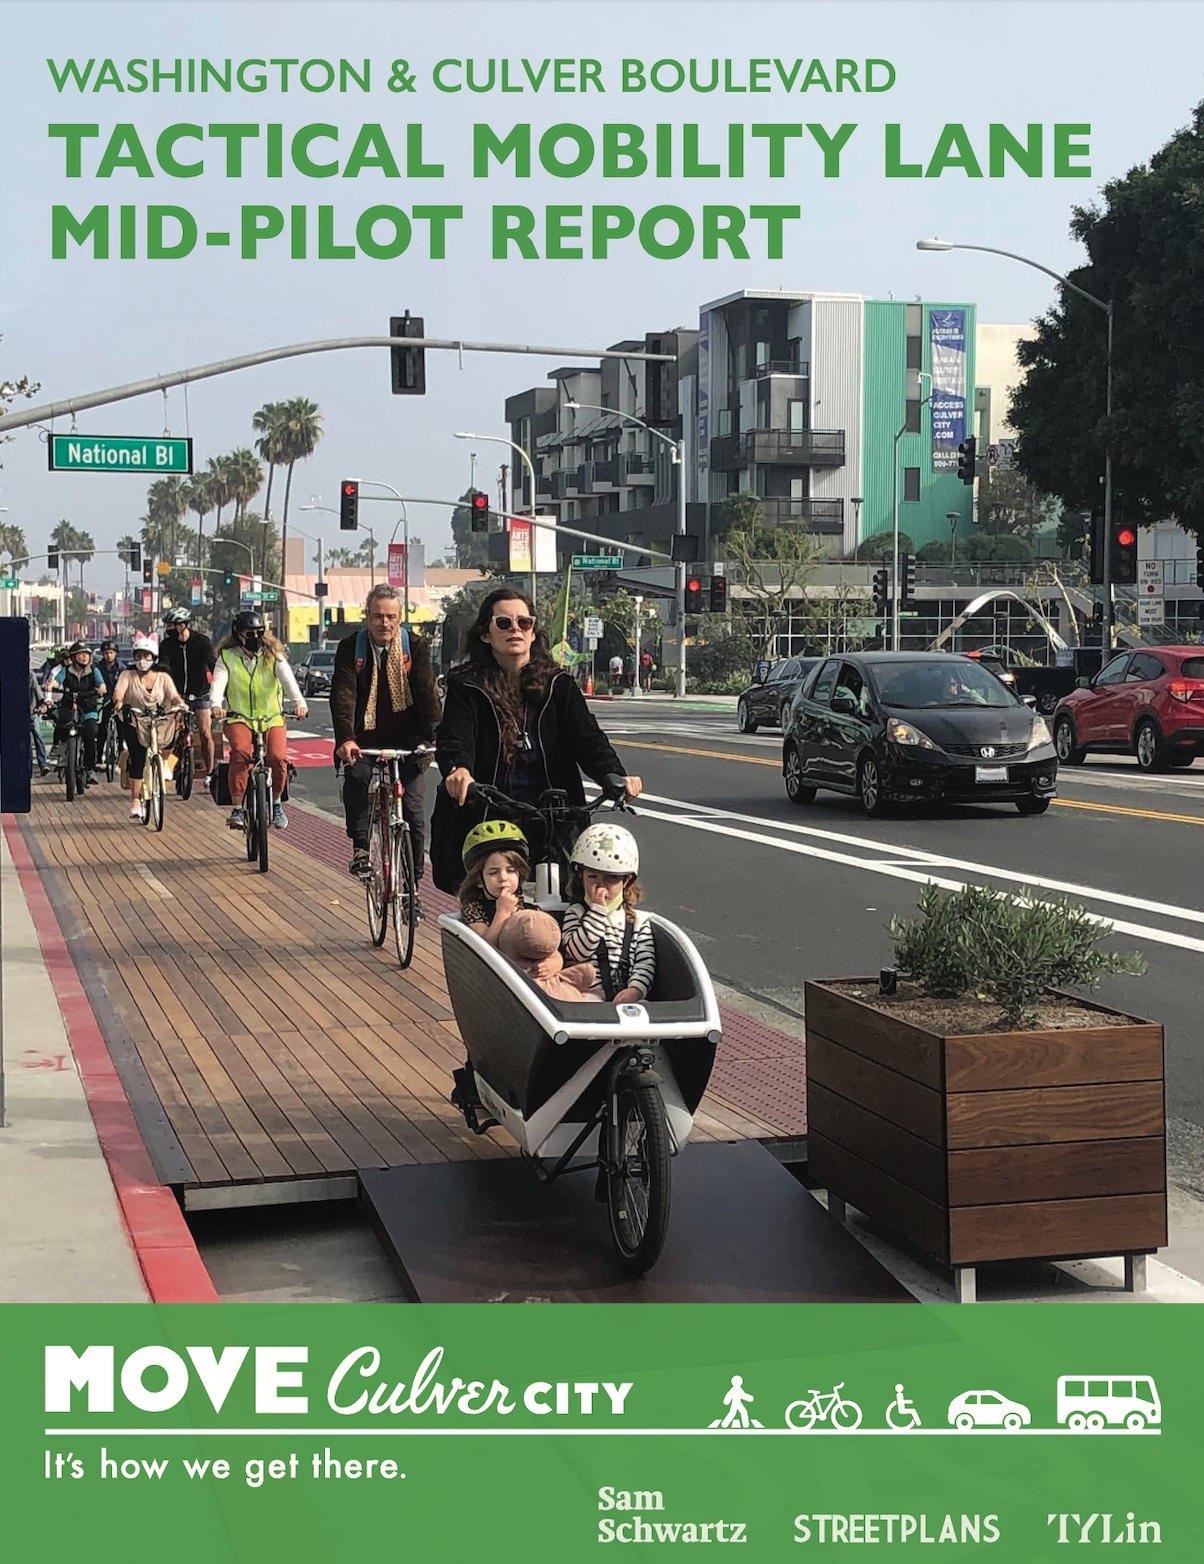 Culver City to bike and bus riders: drop dead — CC council votes to rip out MOVE Culver City Complete Streets project - BikinginLA